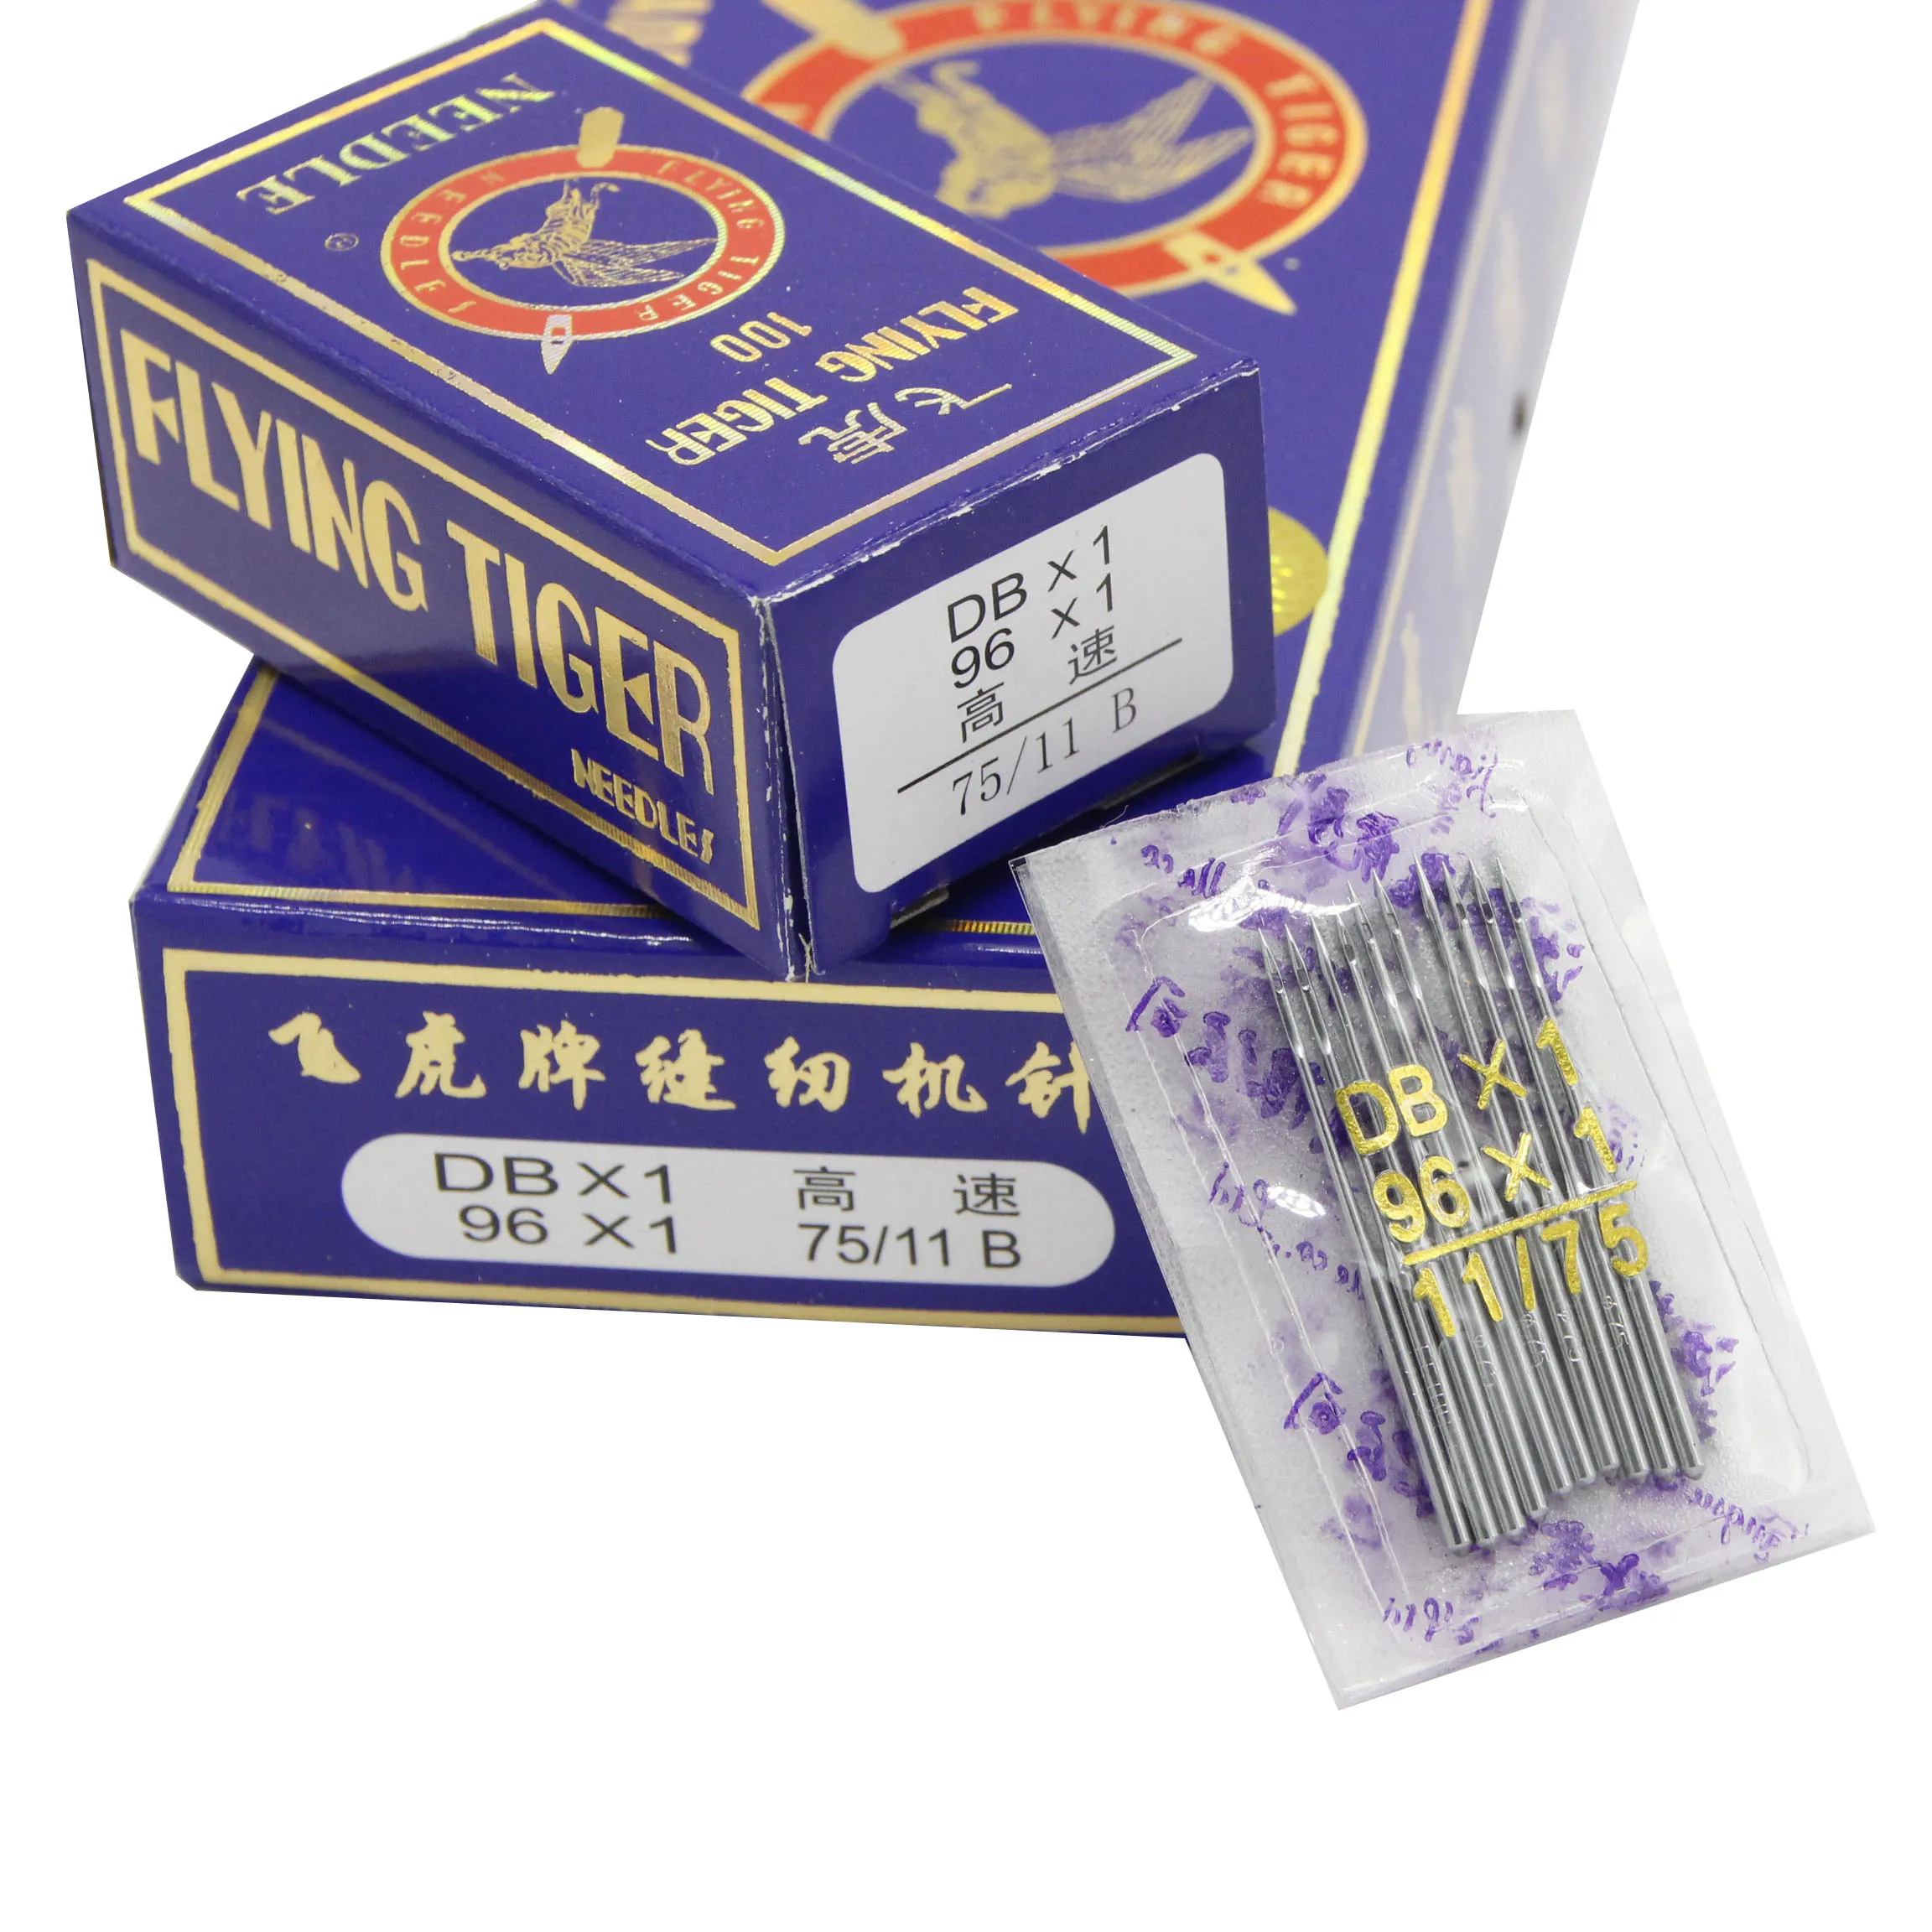 Apparel machine parts flying  tiger sewing needles for flat sewing machine attachments